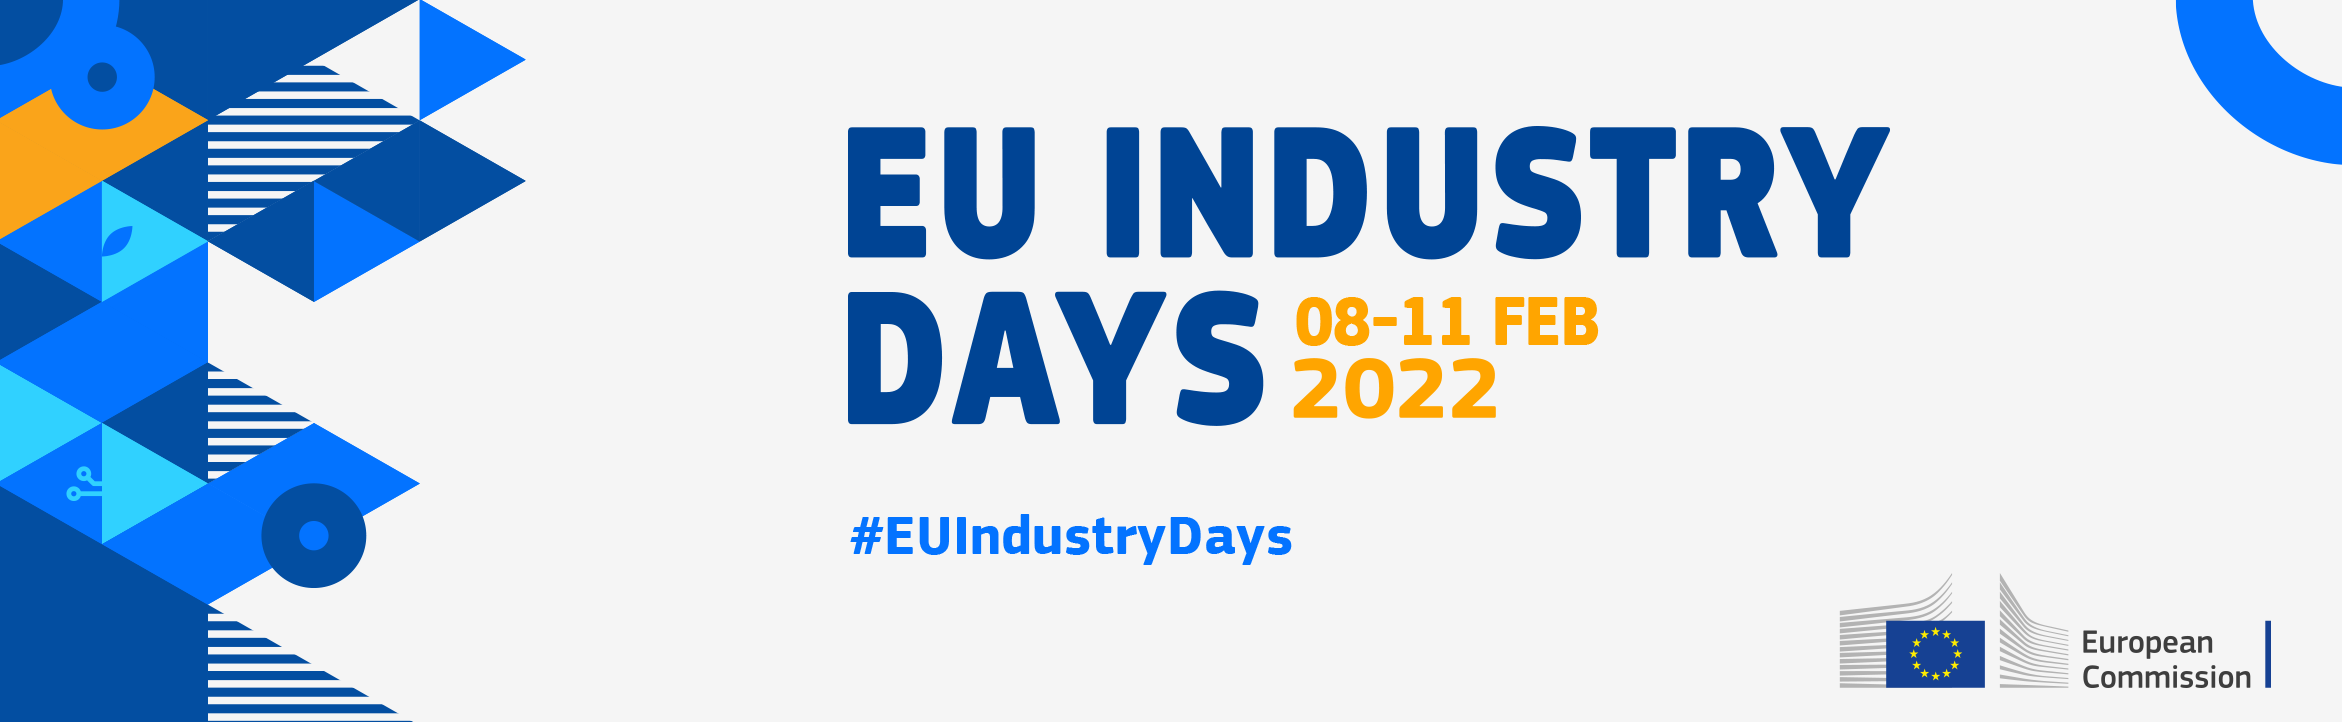 Banner with text "EU Industry Days 8 - 11 February 2022"